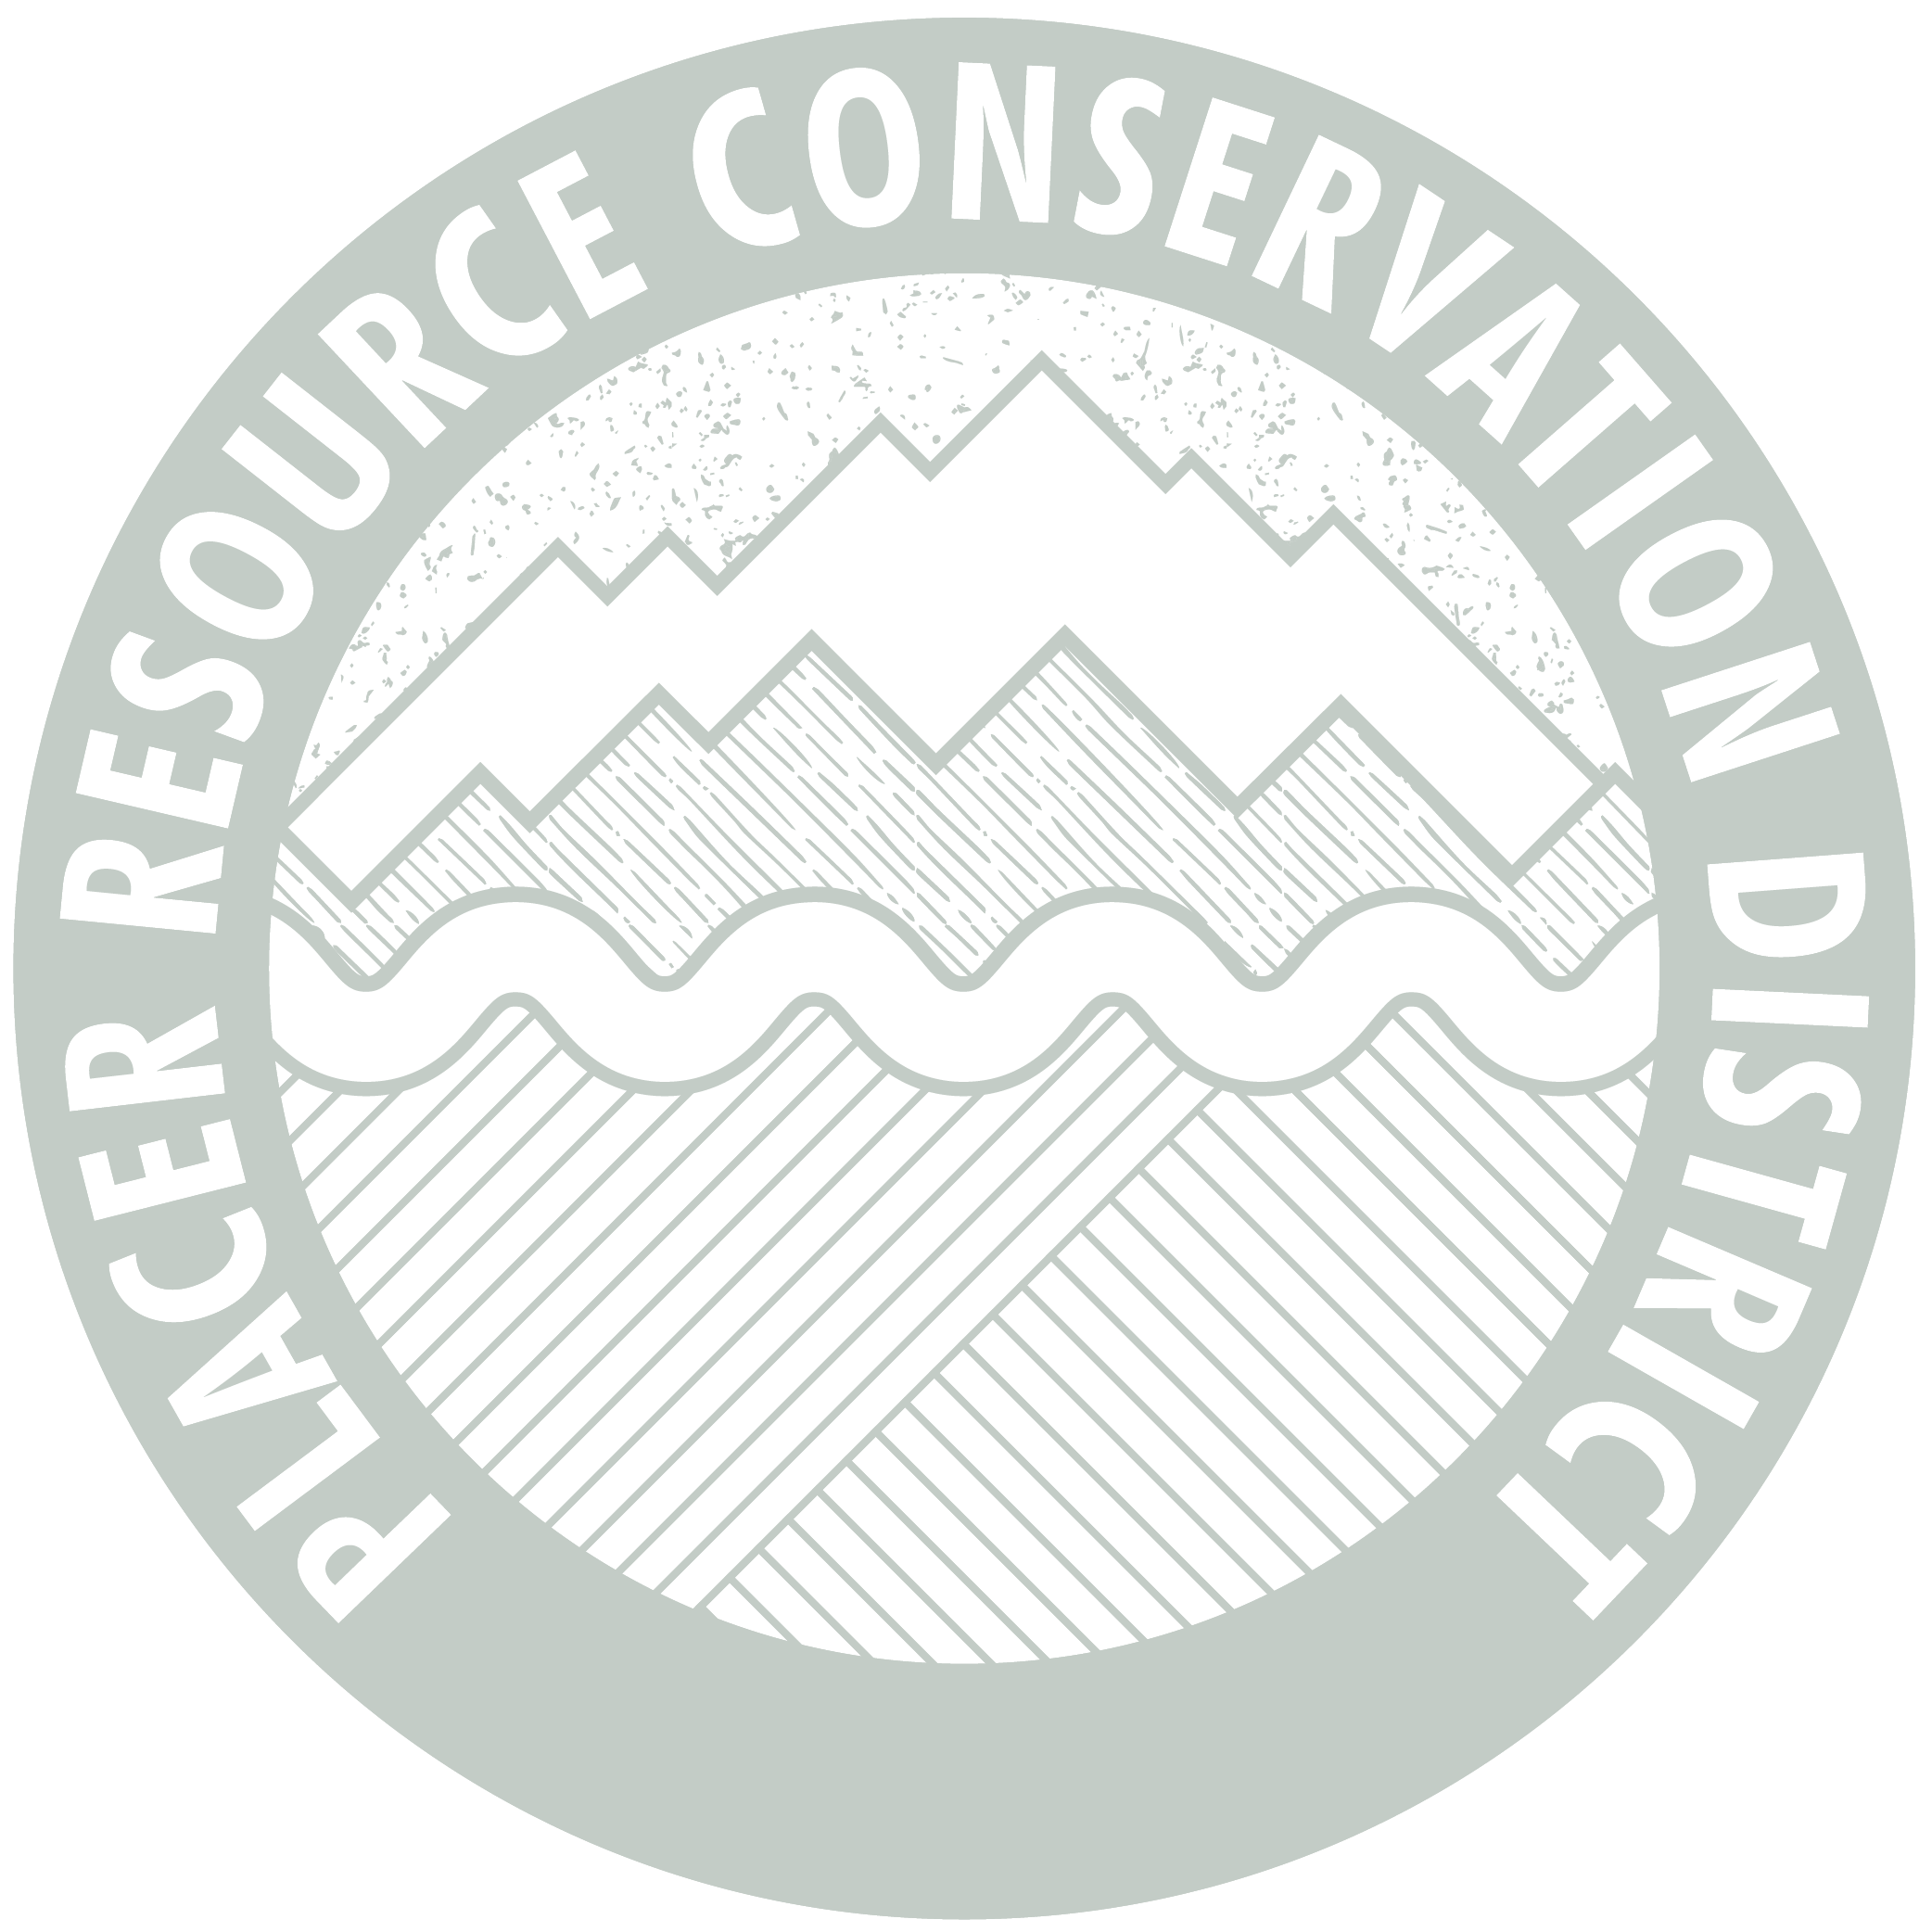 Grayscale version of Placer RCD logo.